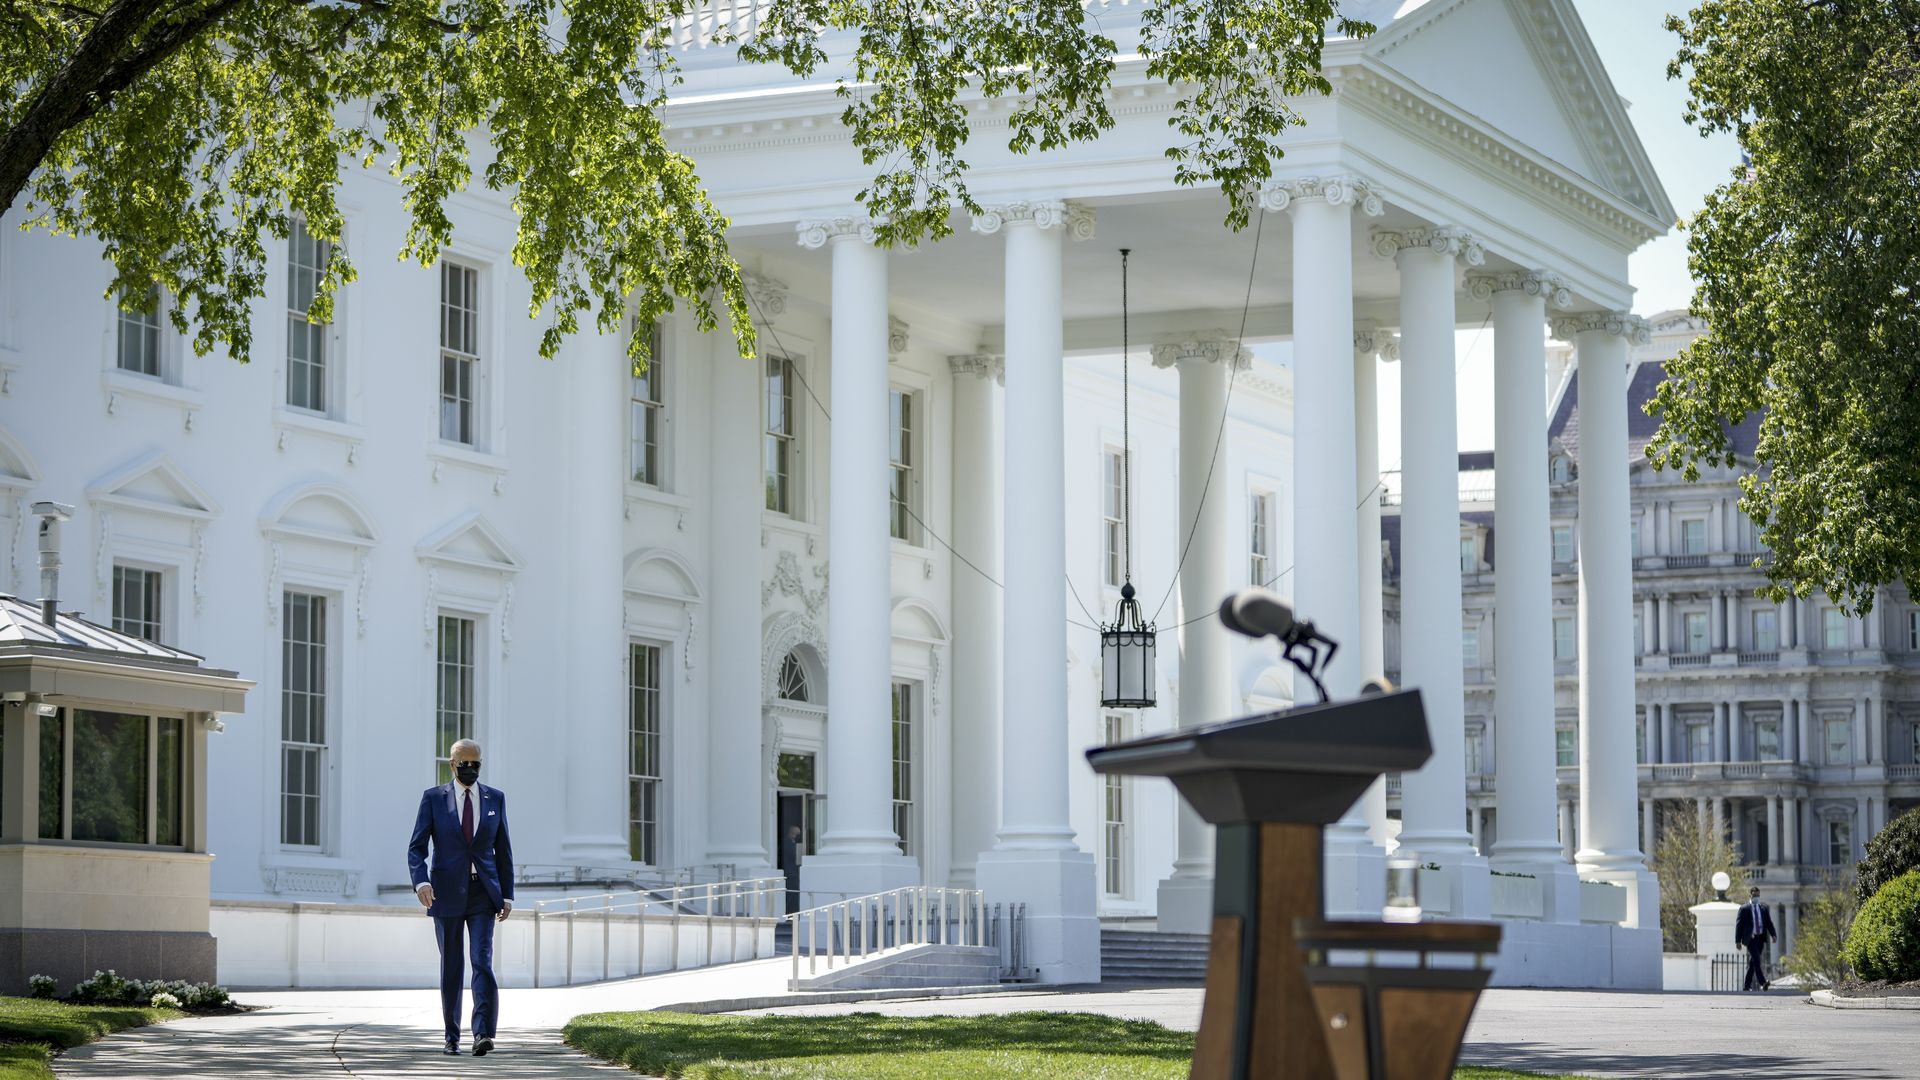 President Biden is seen approaching a podium installed on the North Lawn of the White House.